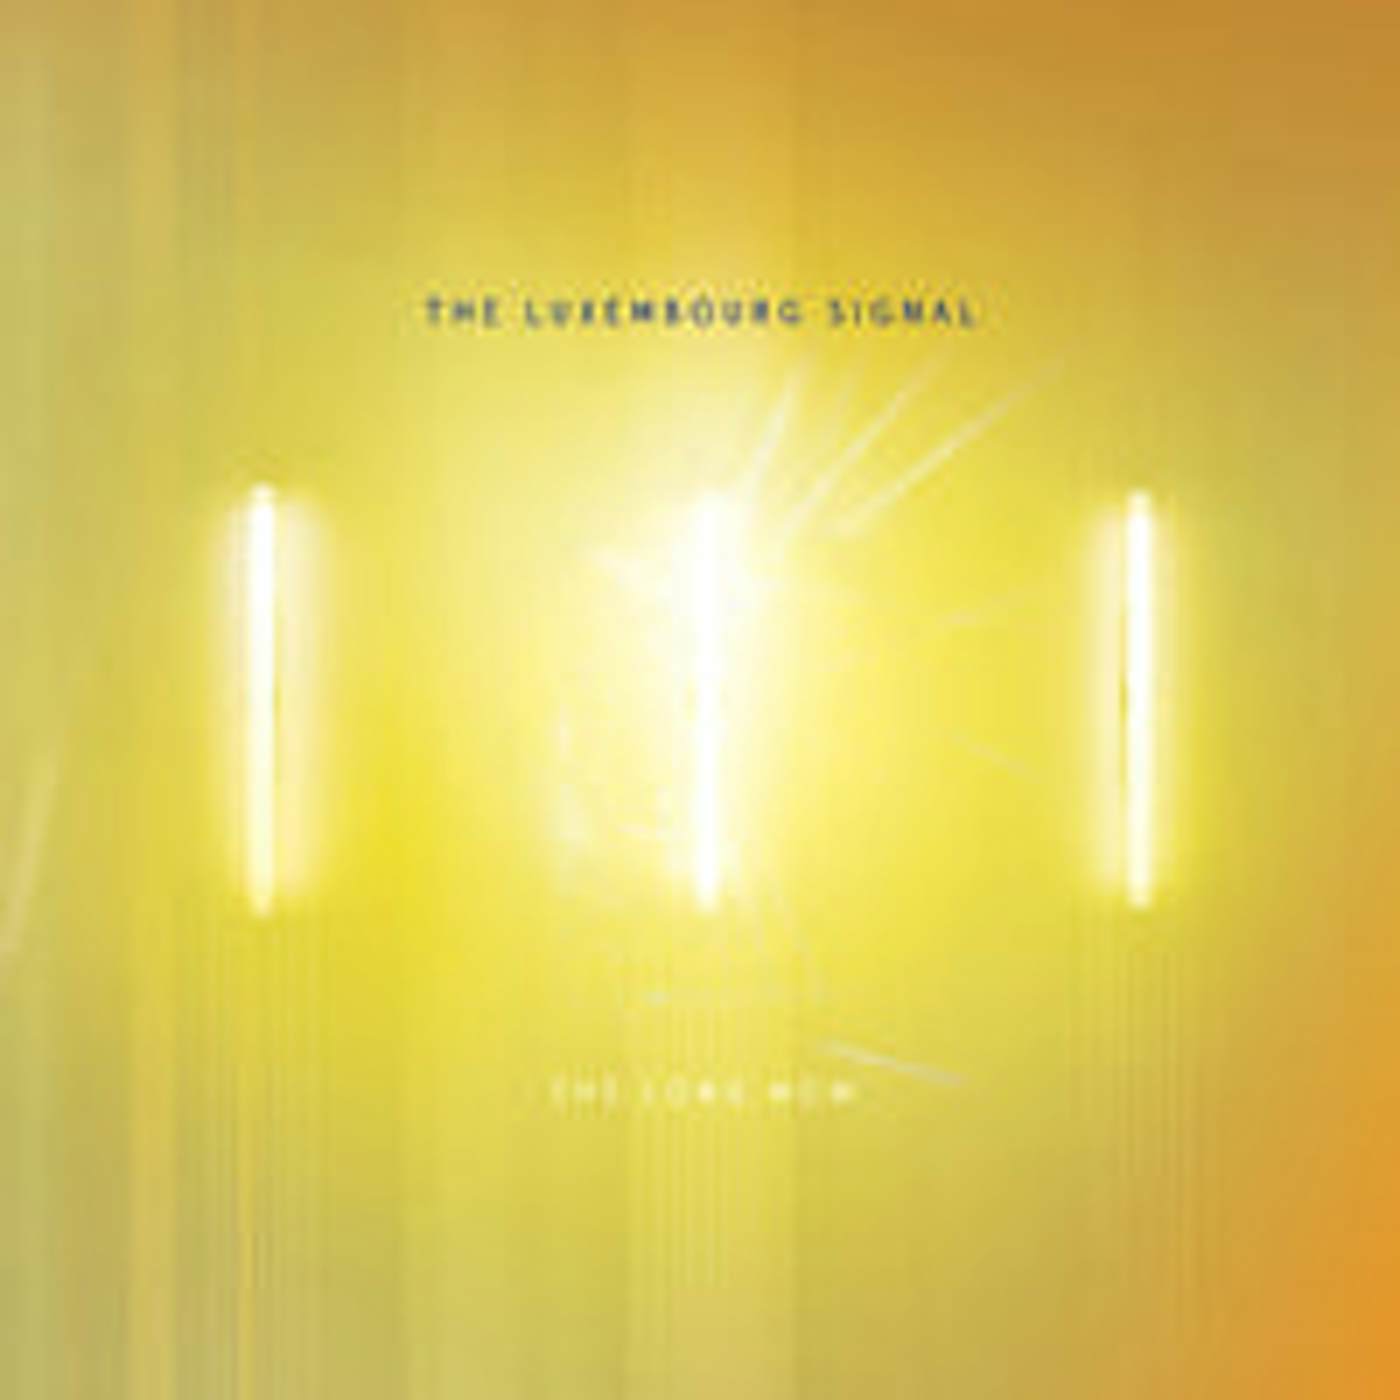 The Luxembourg Signal LP - The Long Now (Vinyl)